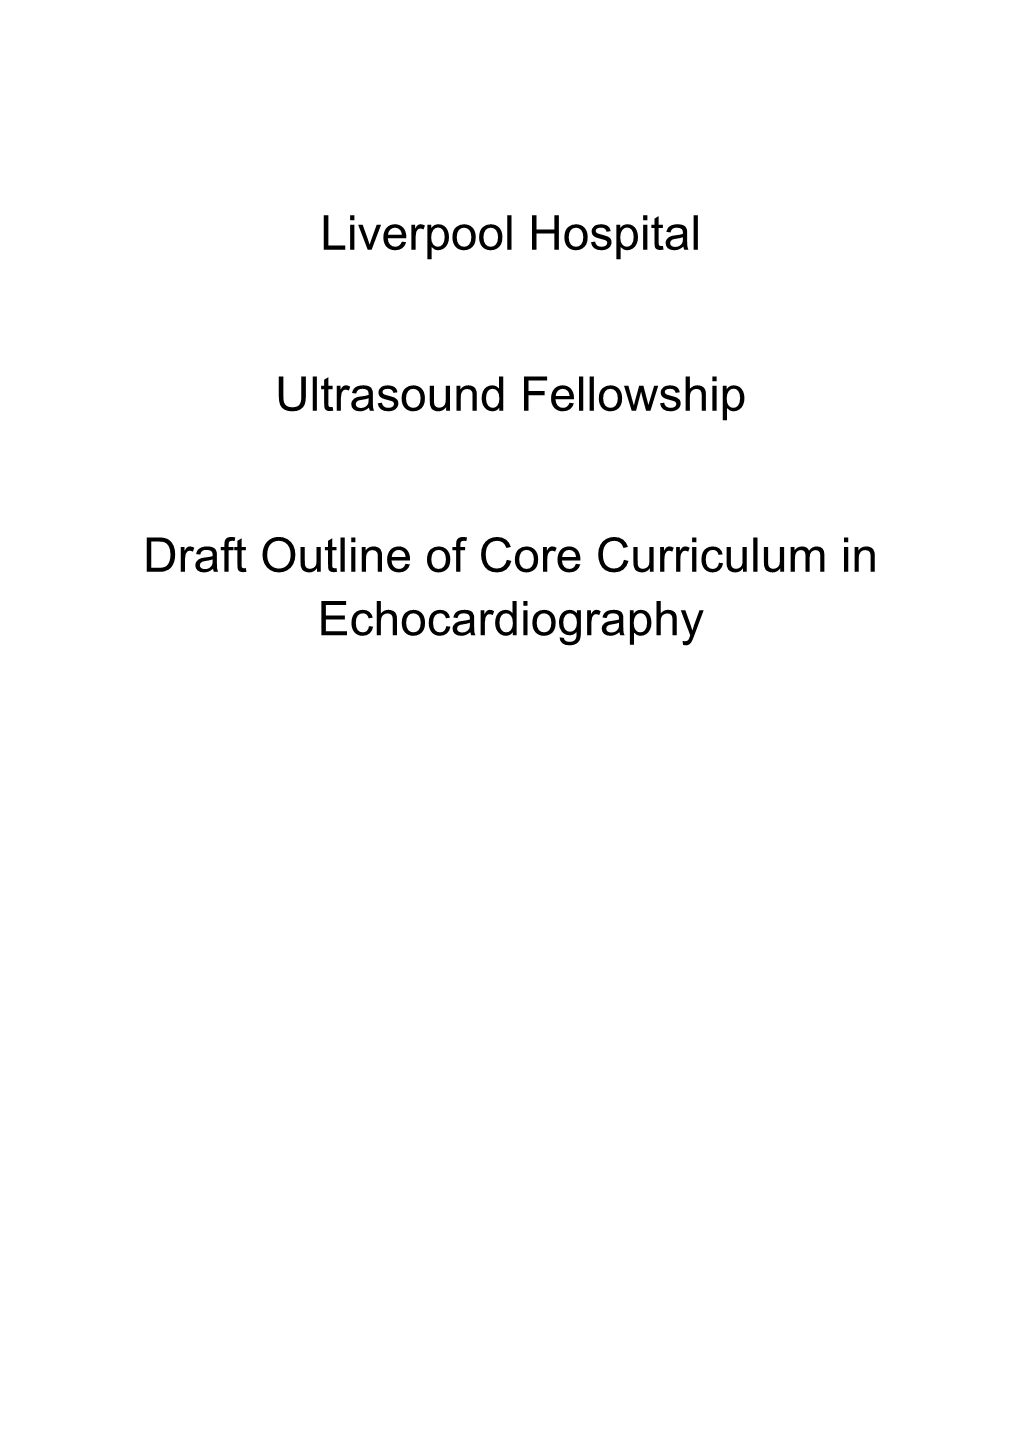 Draft Outline of Core Curriculum in Echocardiography